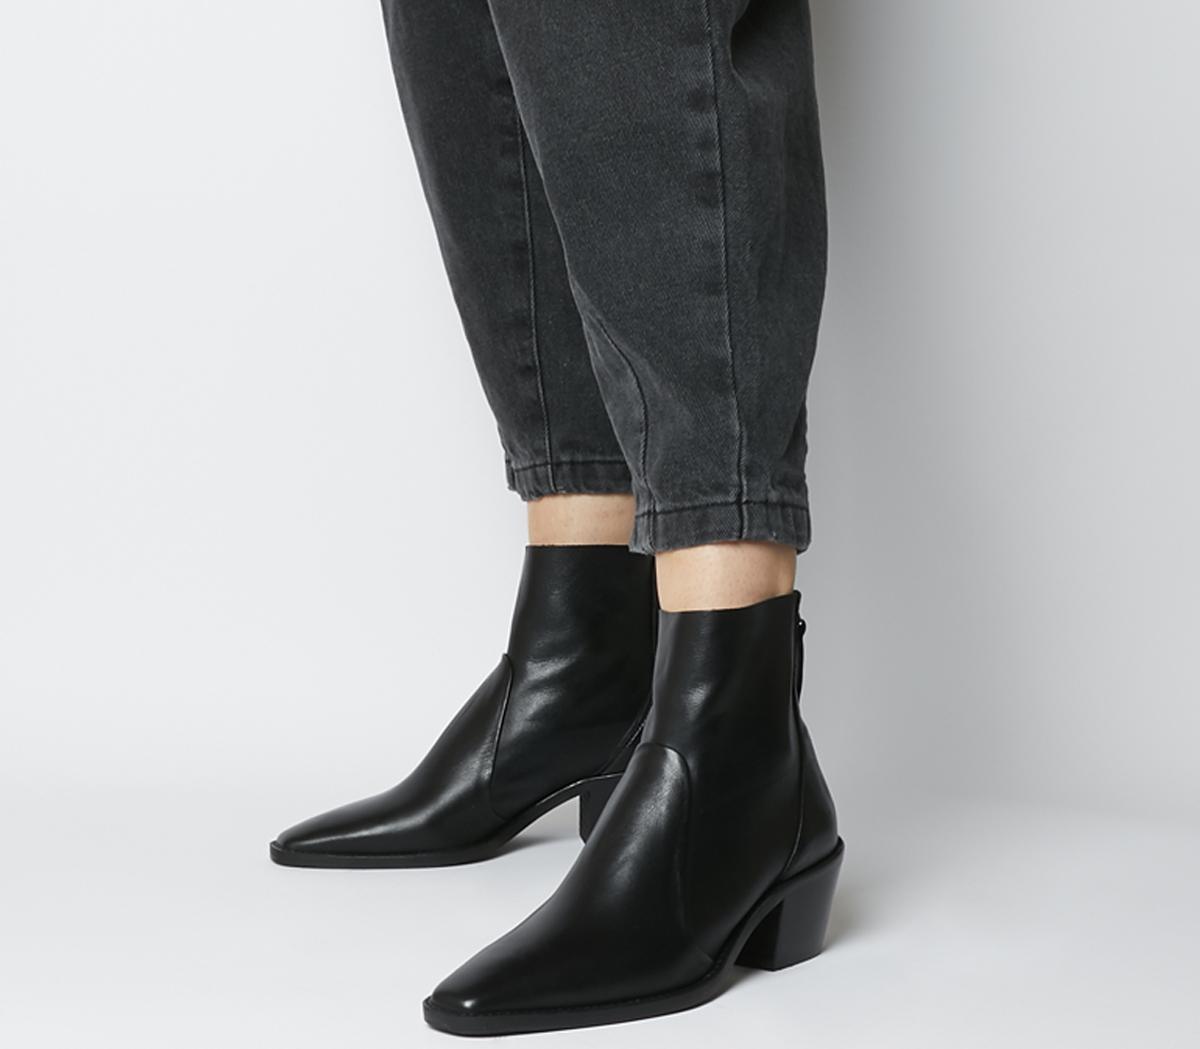 OFFICEArise Unlined BootsBlack Leather